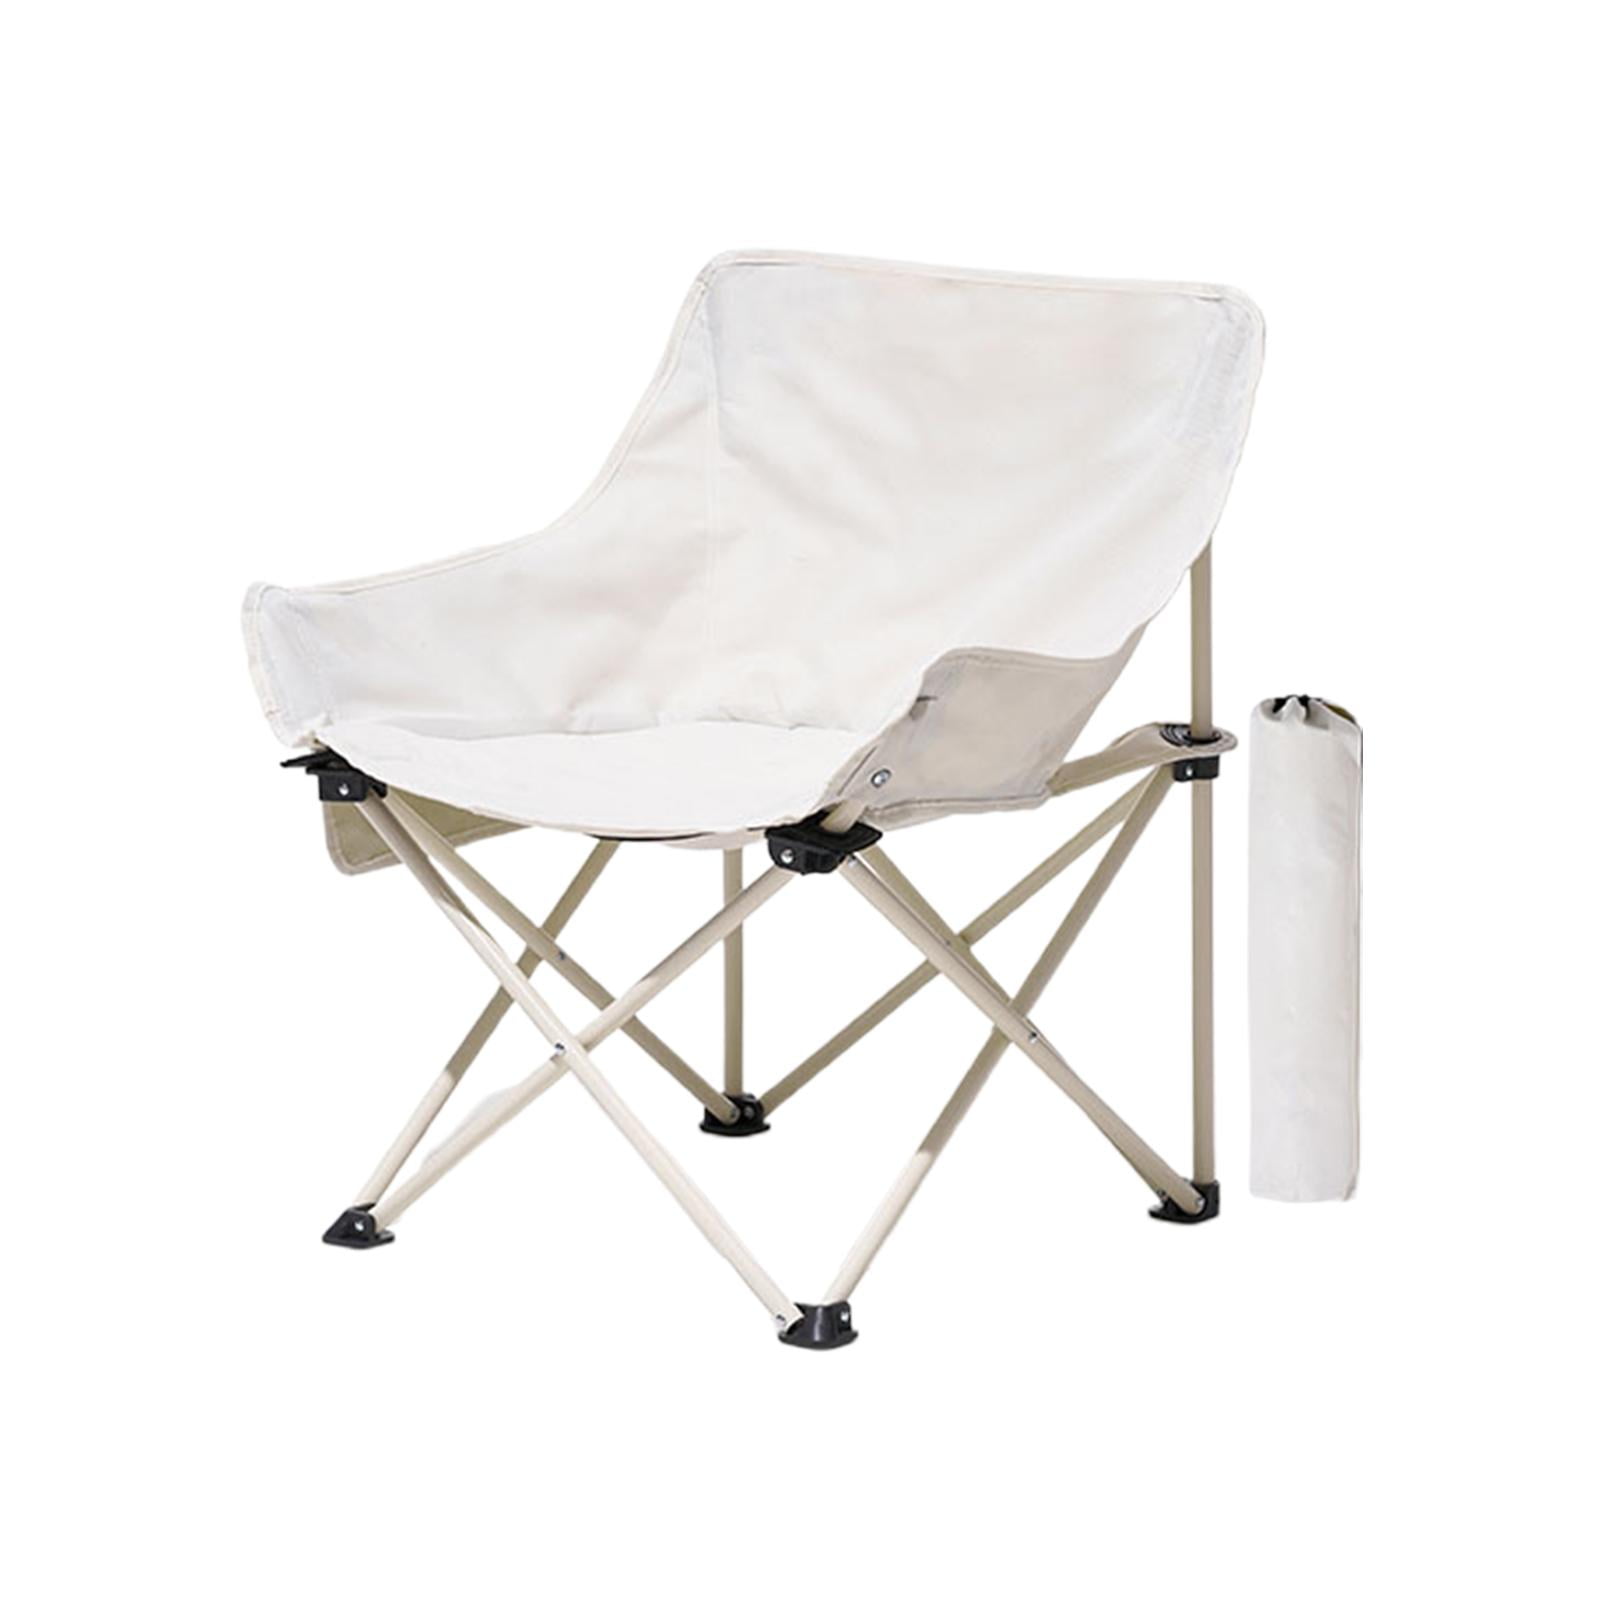 Lightweight Foldable Portable Chair Fishing Beach Leisure Travel Chair  Bl16384 - China Folding Camping Chair, Folding Stool